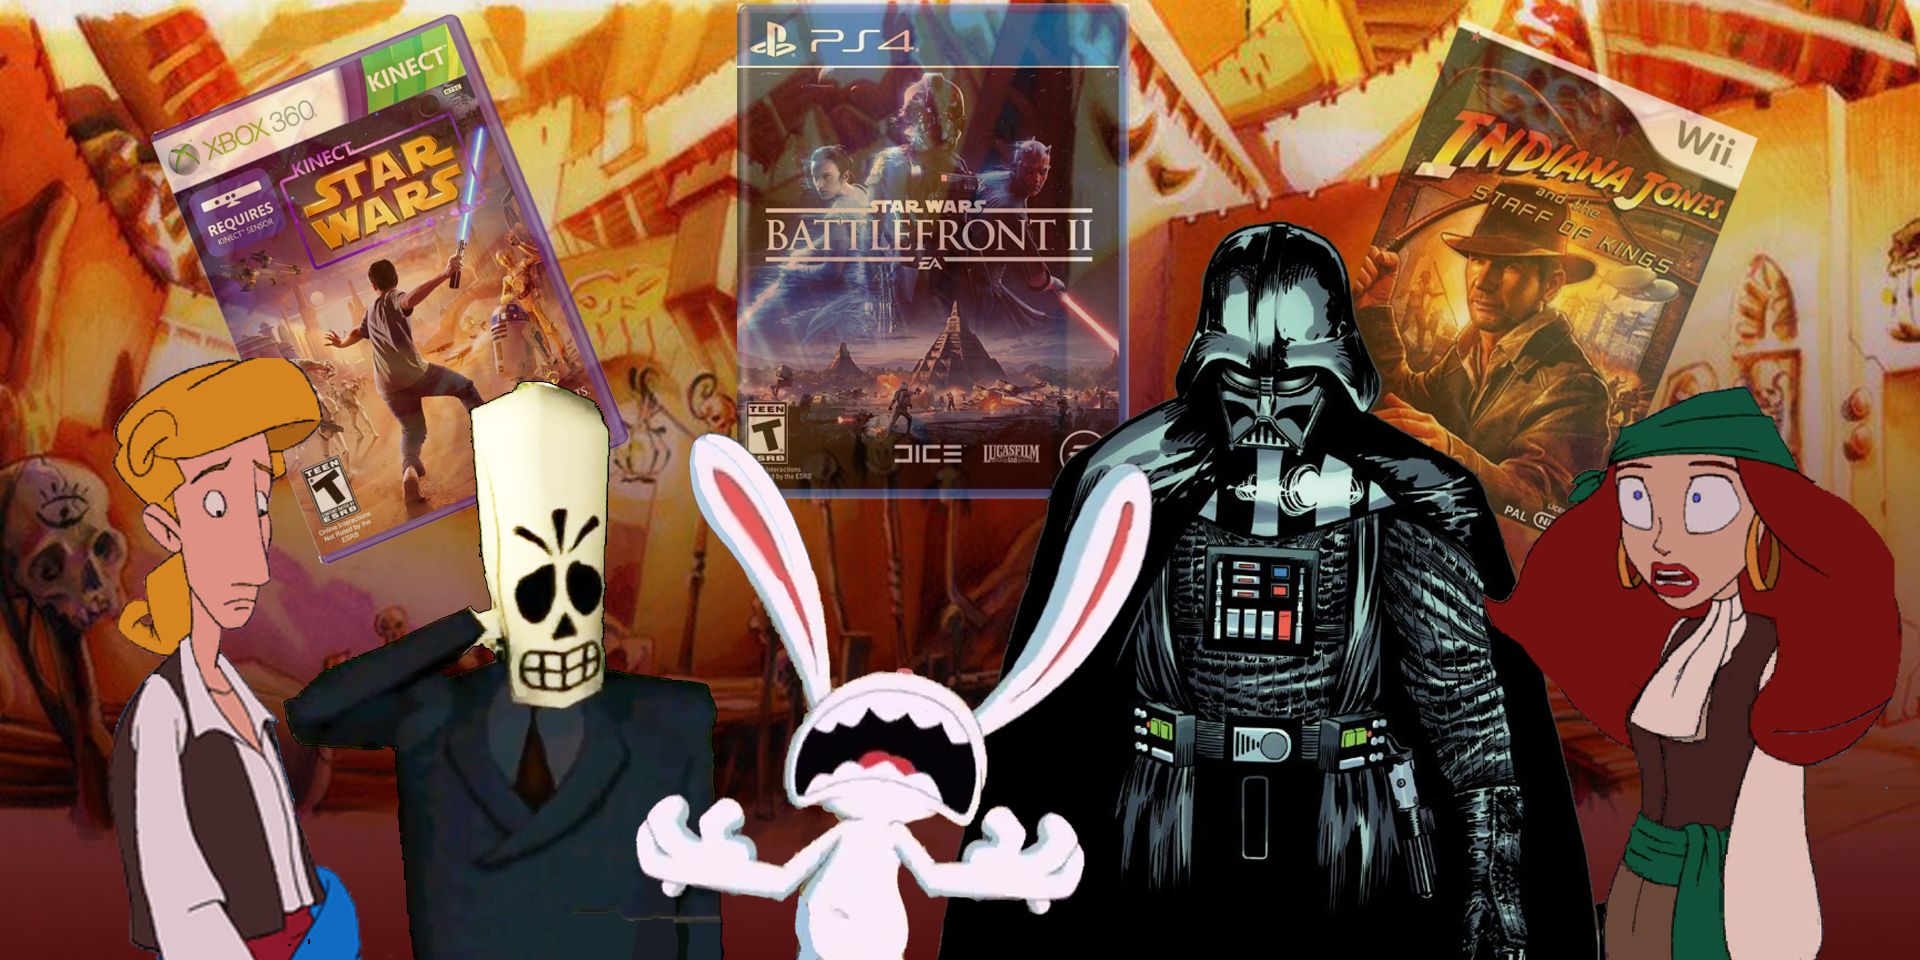 A collage of Lucasfilm characters looking sad with several Lucasfilm games behind them